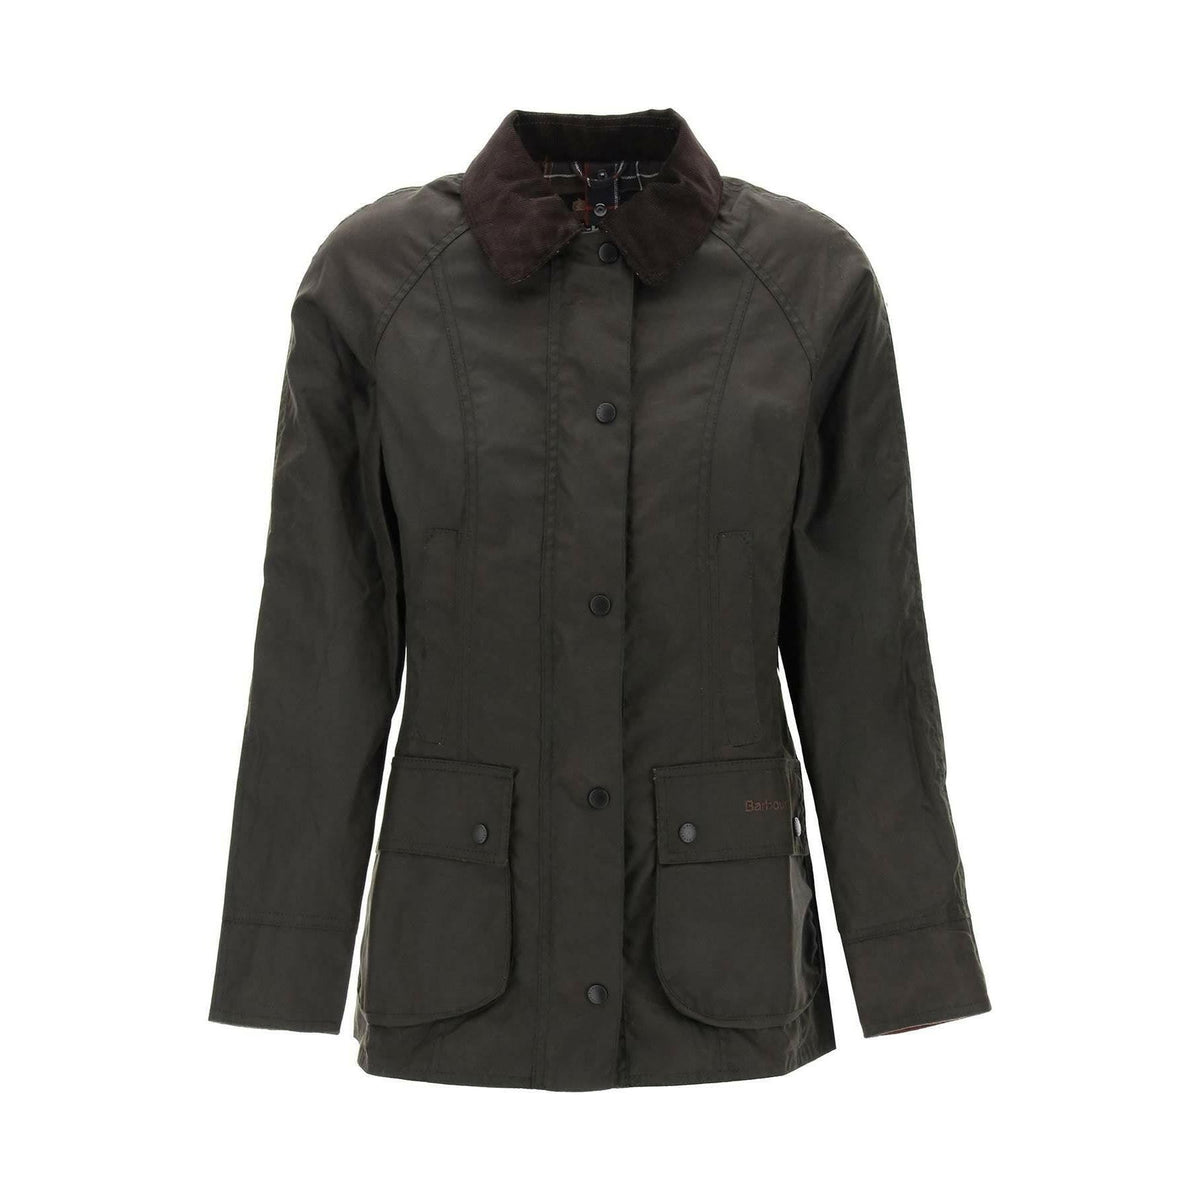 BARBOUR - Olive Beadnell Wax Cotton Casual Jacket - JOHN JULIA